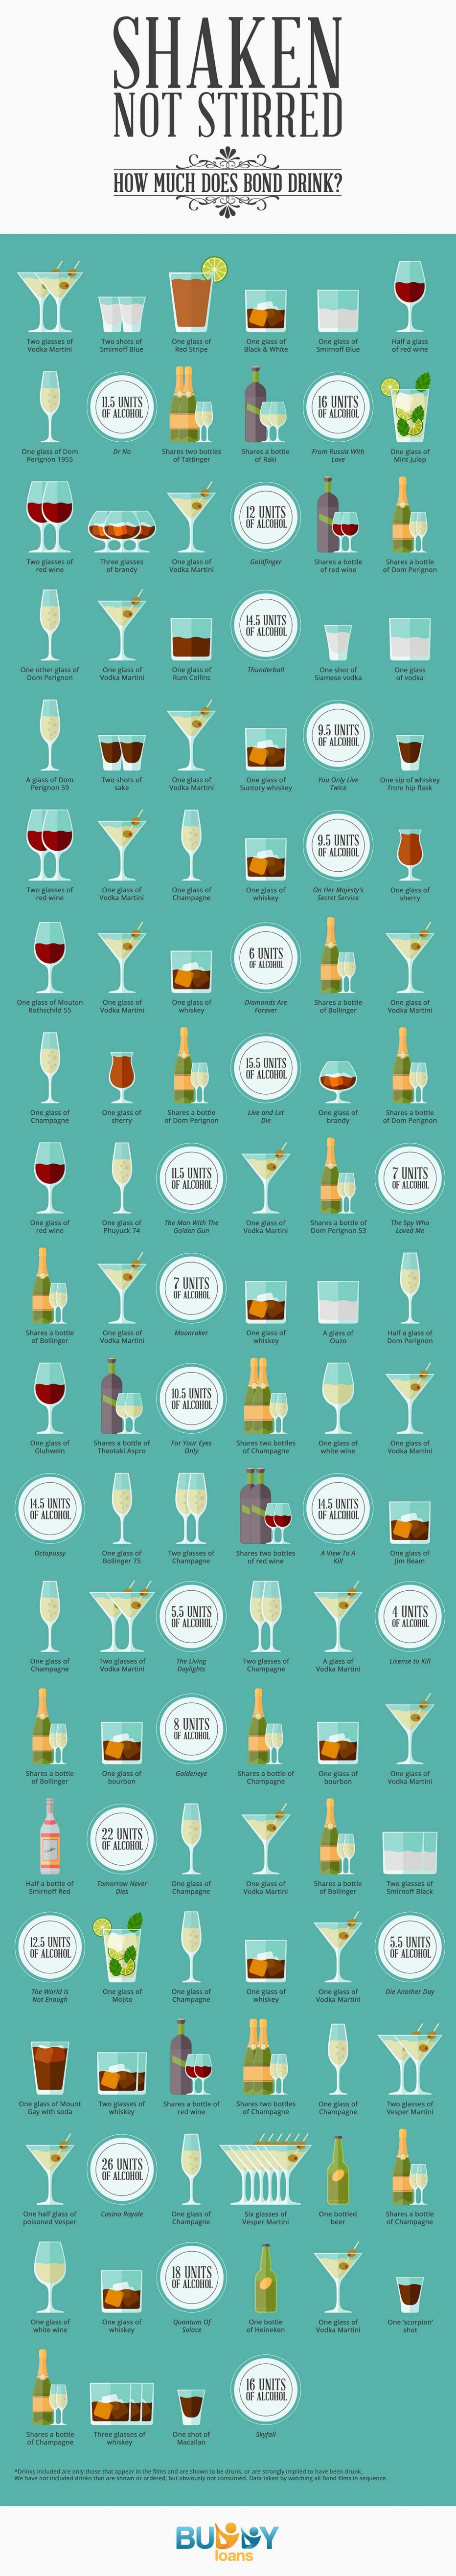 Infographic: How Much Does James Bond Drink? — GeekTyrant